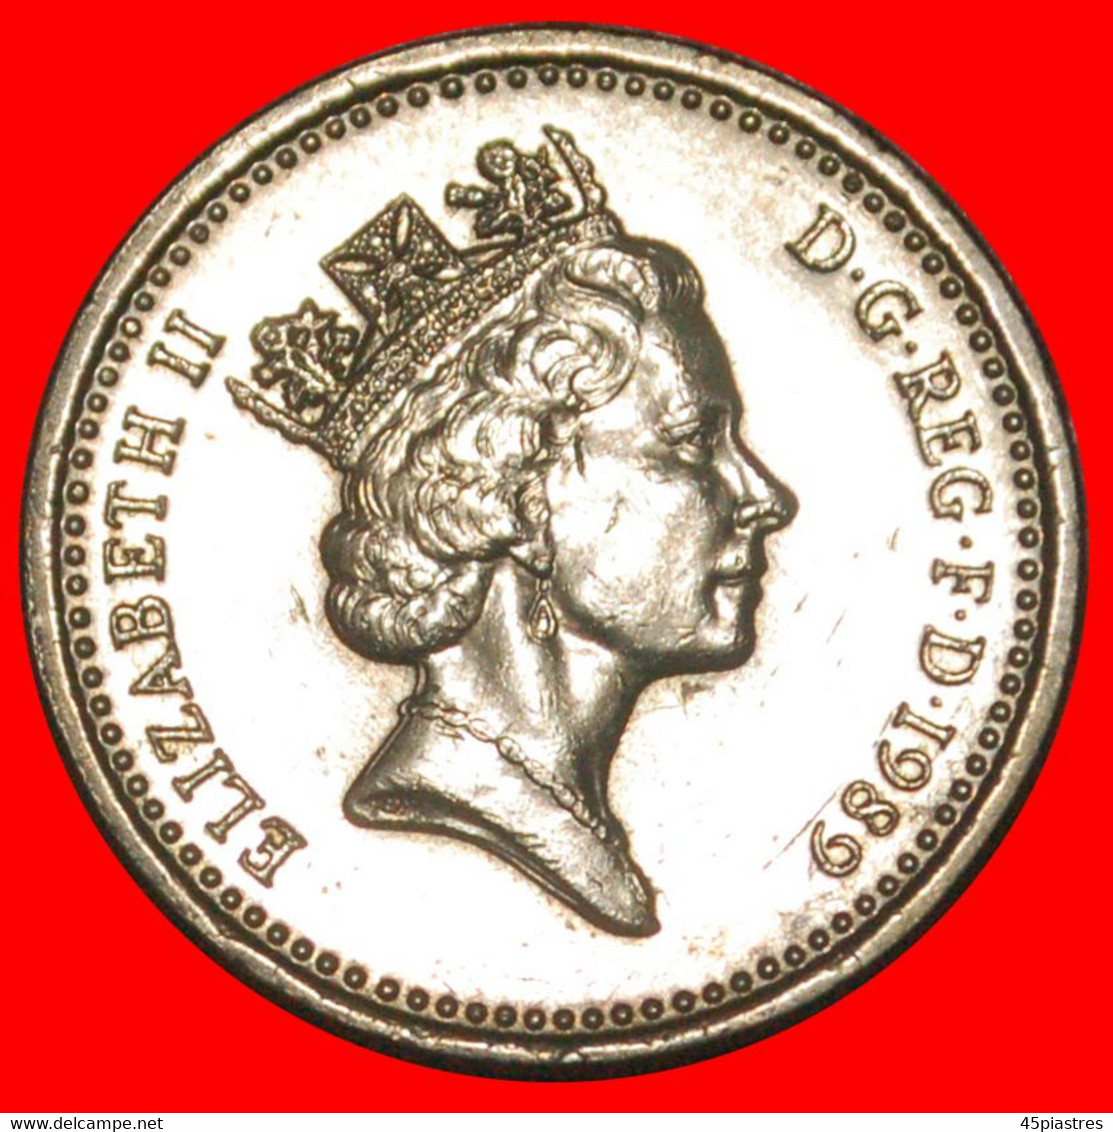 * THISTLE: GREAT BRITAIN ★ 1 POUND 1989 XF!  LOW START ★ NO RESERVE! - 1 Pound